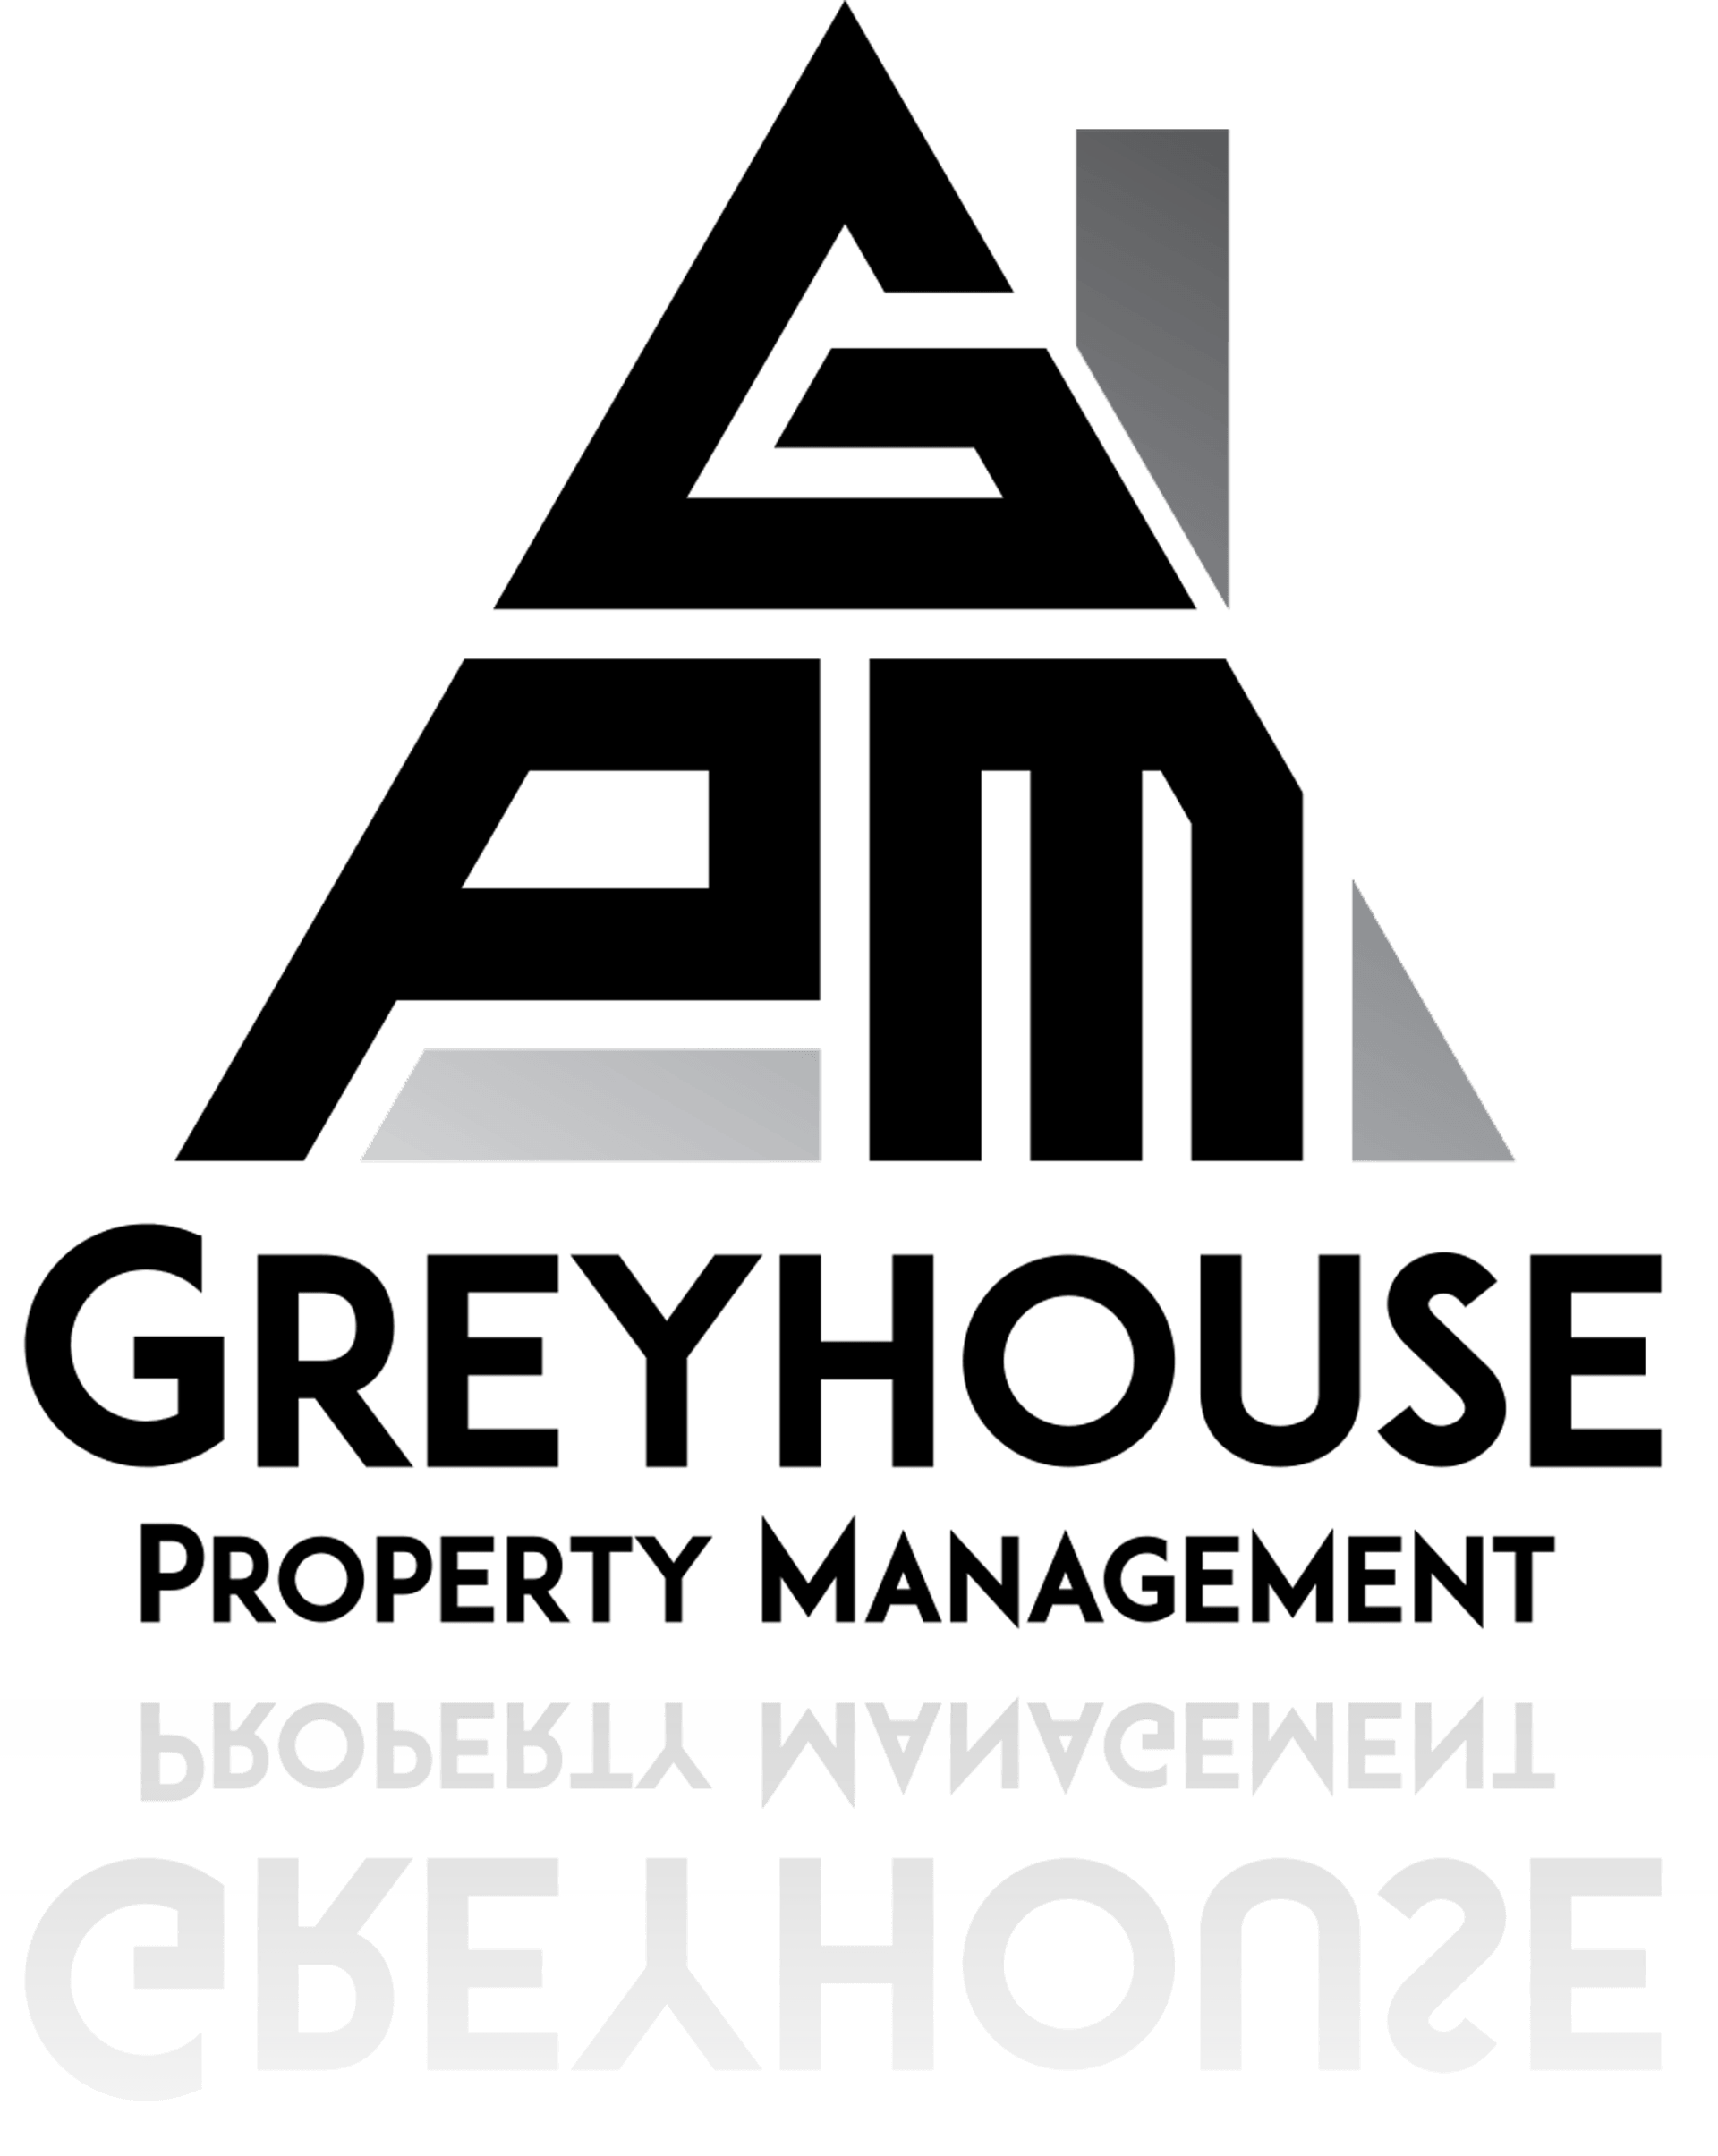 Greyhouse Property Management Company Logo - Click to go to home page